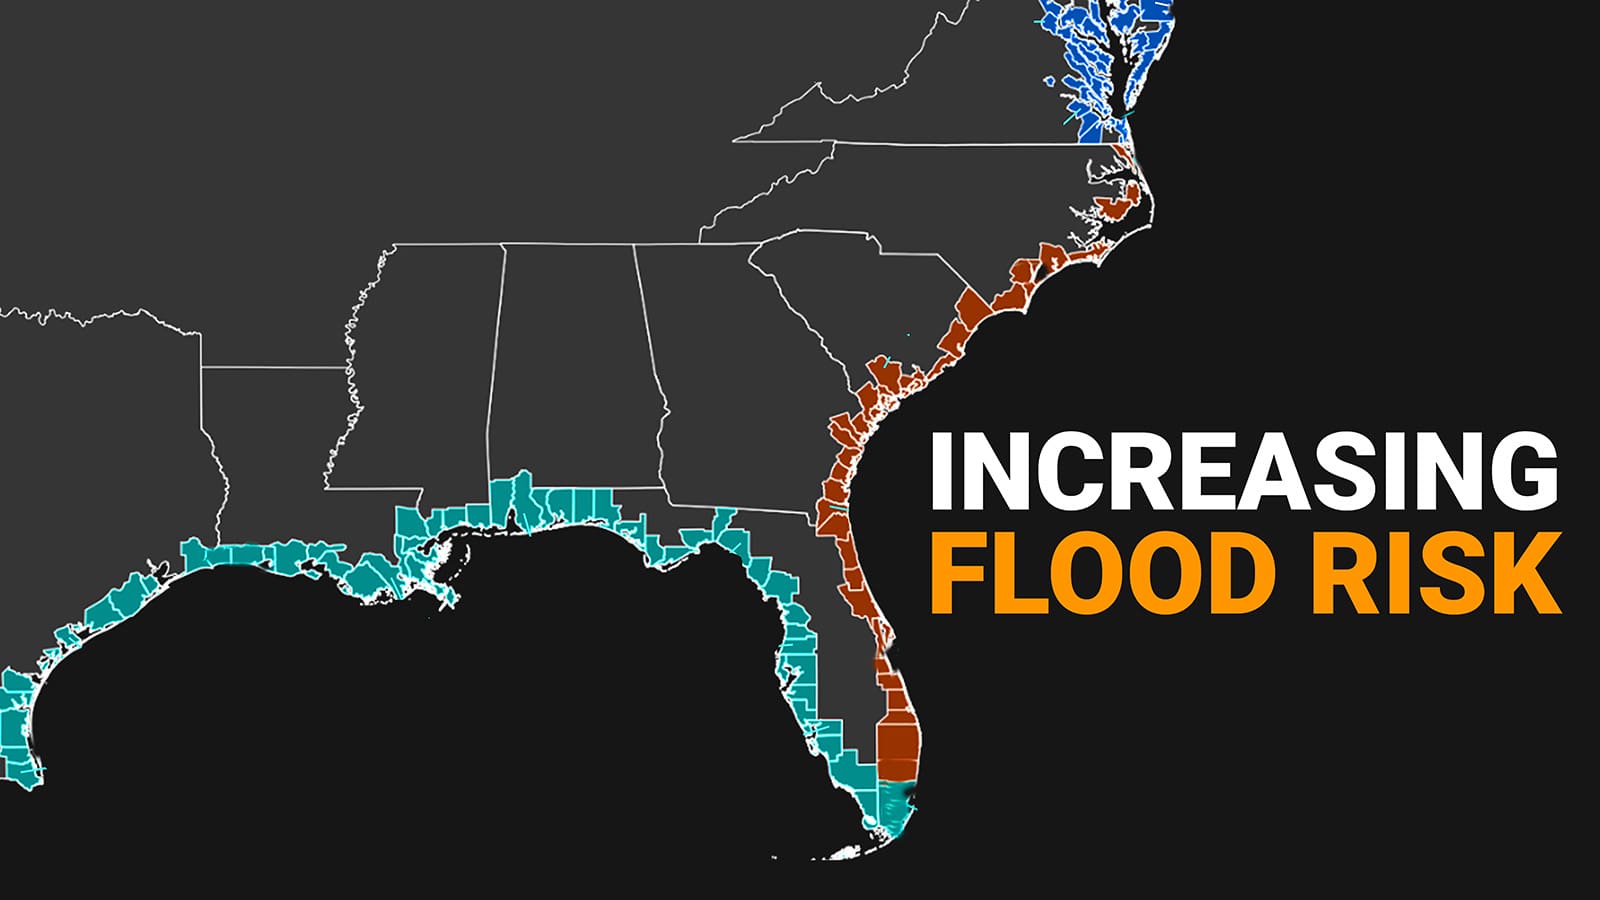 Map of East and Gulf Coasts on black background with words "INCREASING FLOOD RISK"